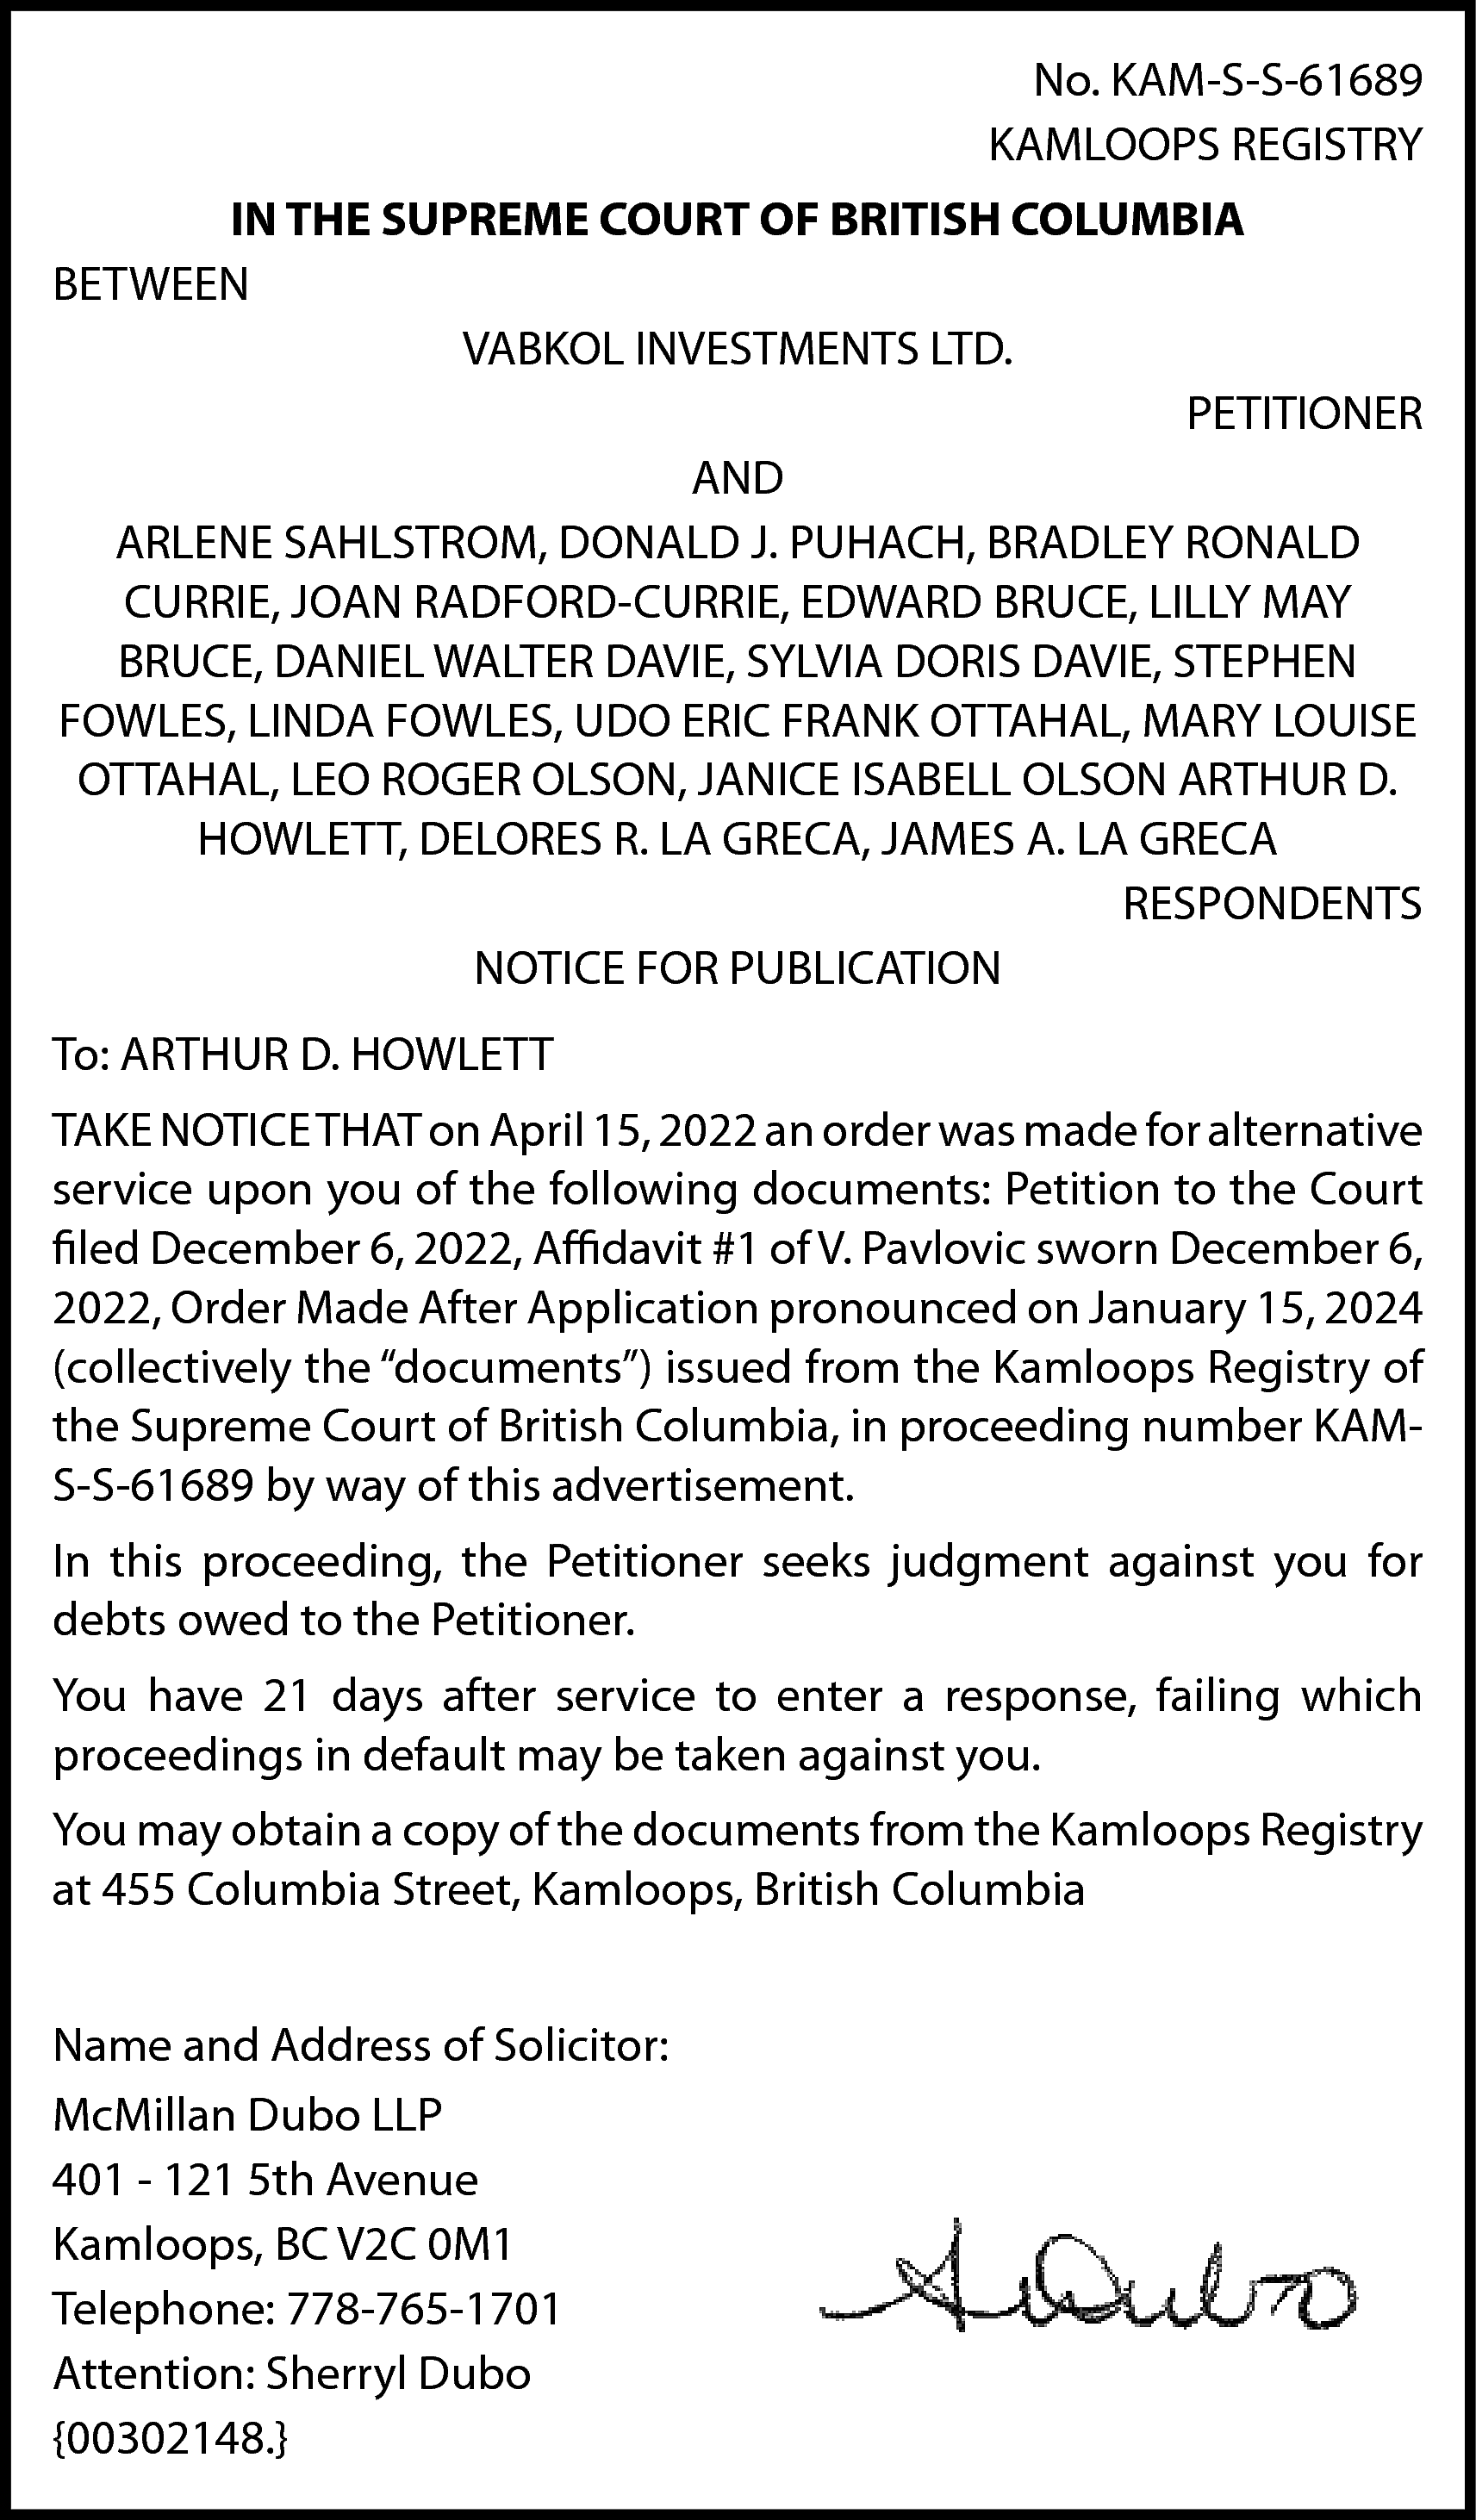 No. KAM-S-S-61689 <br>KAMLOOPS REGISTRY <br>IN  No. KAM-S-S-61689  KAMLOOPS REGISTRY  IN THE SUPREME COURT OF BRITISH COLUMBIA  BETWEEN  VABKOL INVESTMENTS LTD.  PETITIONER  AND  ARLENE SAHLSTROM, DONALD J. PUHACH, BRADLEY RONALD  CURRIE, JOAN RADFORD-CURRIE, EDWARD BRUCE, LILLY MAY  BRUCE, DANIEL WALTER DAVIE, SYLVIA DORIS DAVIE, STEPHEN  FOWLES, LINDA FOWLES, UDO ERIC FRANK OTTAHAL, MARY LOUISE  OTTAHAL, LEO ROGER OLSON, JANICE ISABELL OLSON ARTHUR D.  HOWLETT, DELORES R. LA GRECA, JAMES A. LA GRECA  RESPONDENTS  NOTICE FOR PUBLICATION  To: ARTHUR D. HOWLETT  TAKE NOTICE THAT on April 15, 2022 an order was made for alternative  service upon you of the following documents: Petition to the Court  filed December 6, 2022, Affidavit #1 of V. Pavlovic sworn December 6,  2022, Order Made After Application pronounced on January 15, 2024  (collectively the “documents”) issued from the Kamloops Registry of  the Supreme Court of British Columbia, in proceeding number KAMS-S-61689 by way of this advertisement.  In this proceeding, the Petitioner seeks judgment against you for  debts owed to the Petitioner.  You have 21 days after service to enter a response, failing which  proceedings in default may be taken against you.  You may obtain a copy of the documents from the Kamloops Registry  at 455 Columbia Street, Kamloops, British Columbia  Name and Address of Solicitor:  McMillan Dubo LLP  401 - 121 5th Avenue  Kamloops, BC V2C 0M1  Telephone: 778-765-1701  Attention: Sherryl Dubo  {00302148.}    